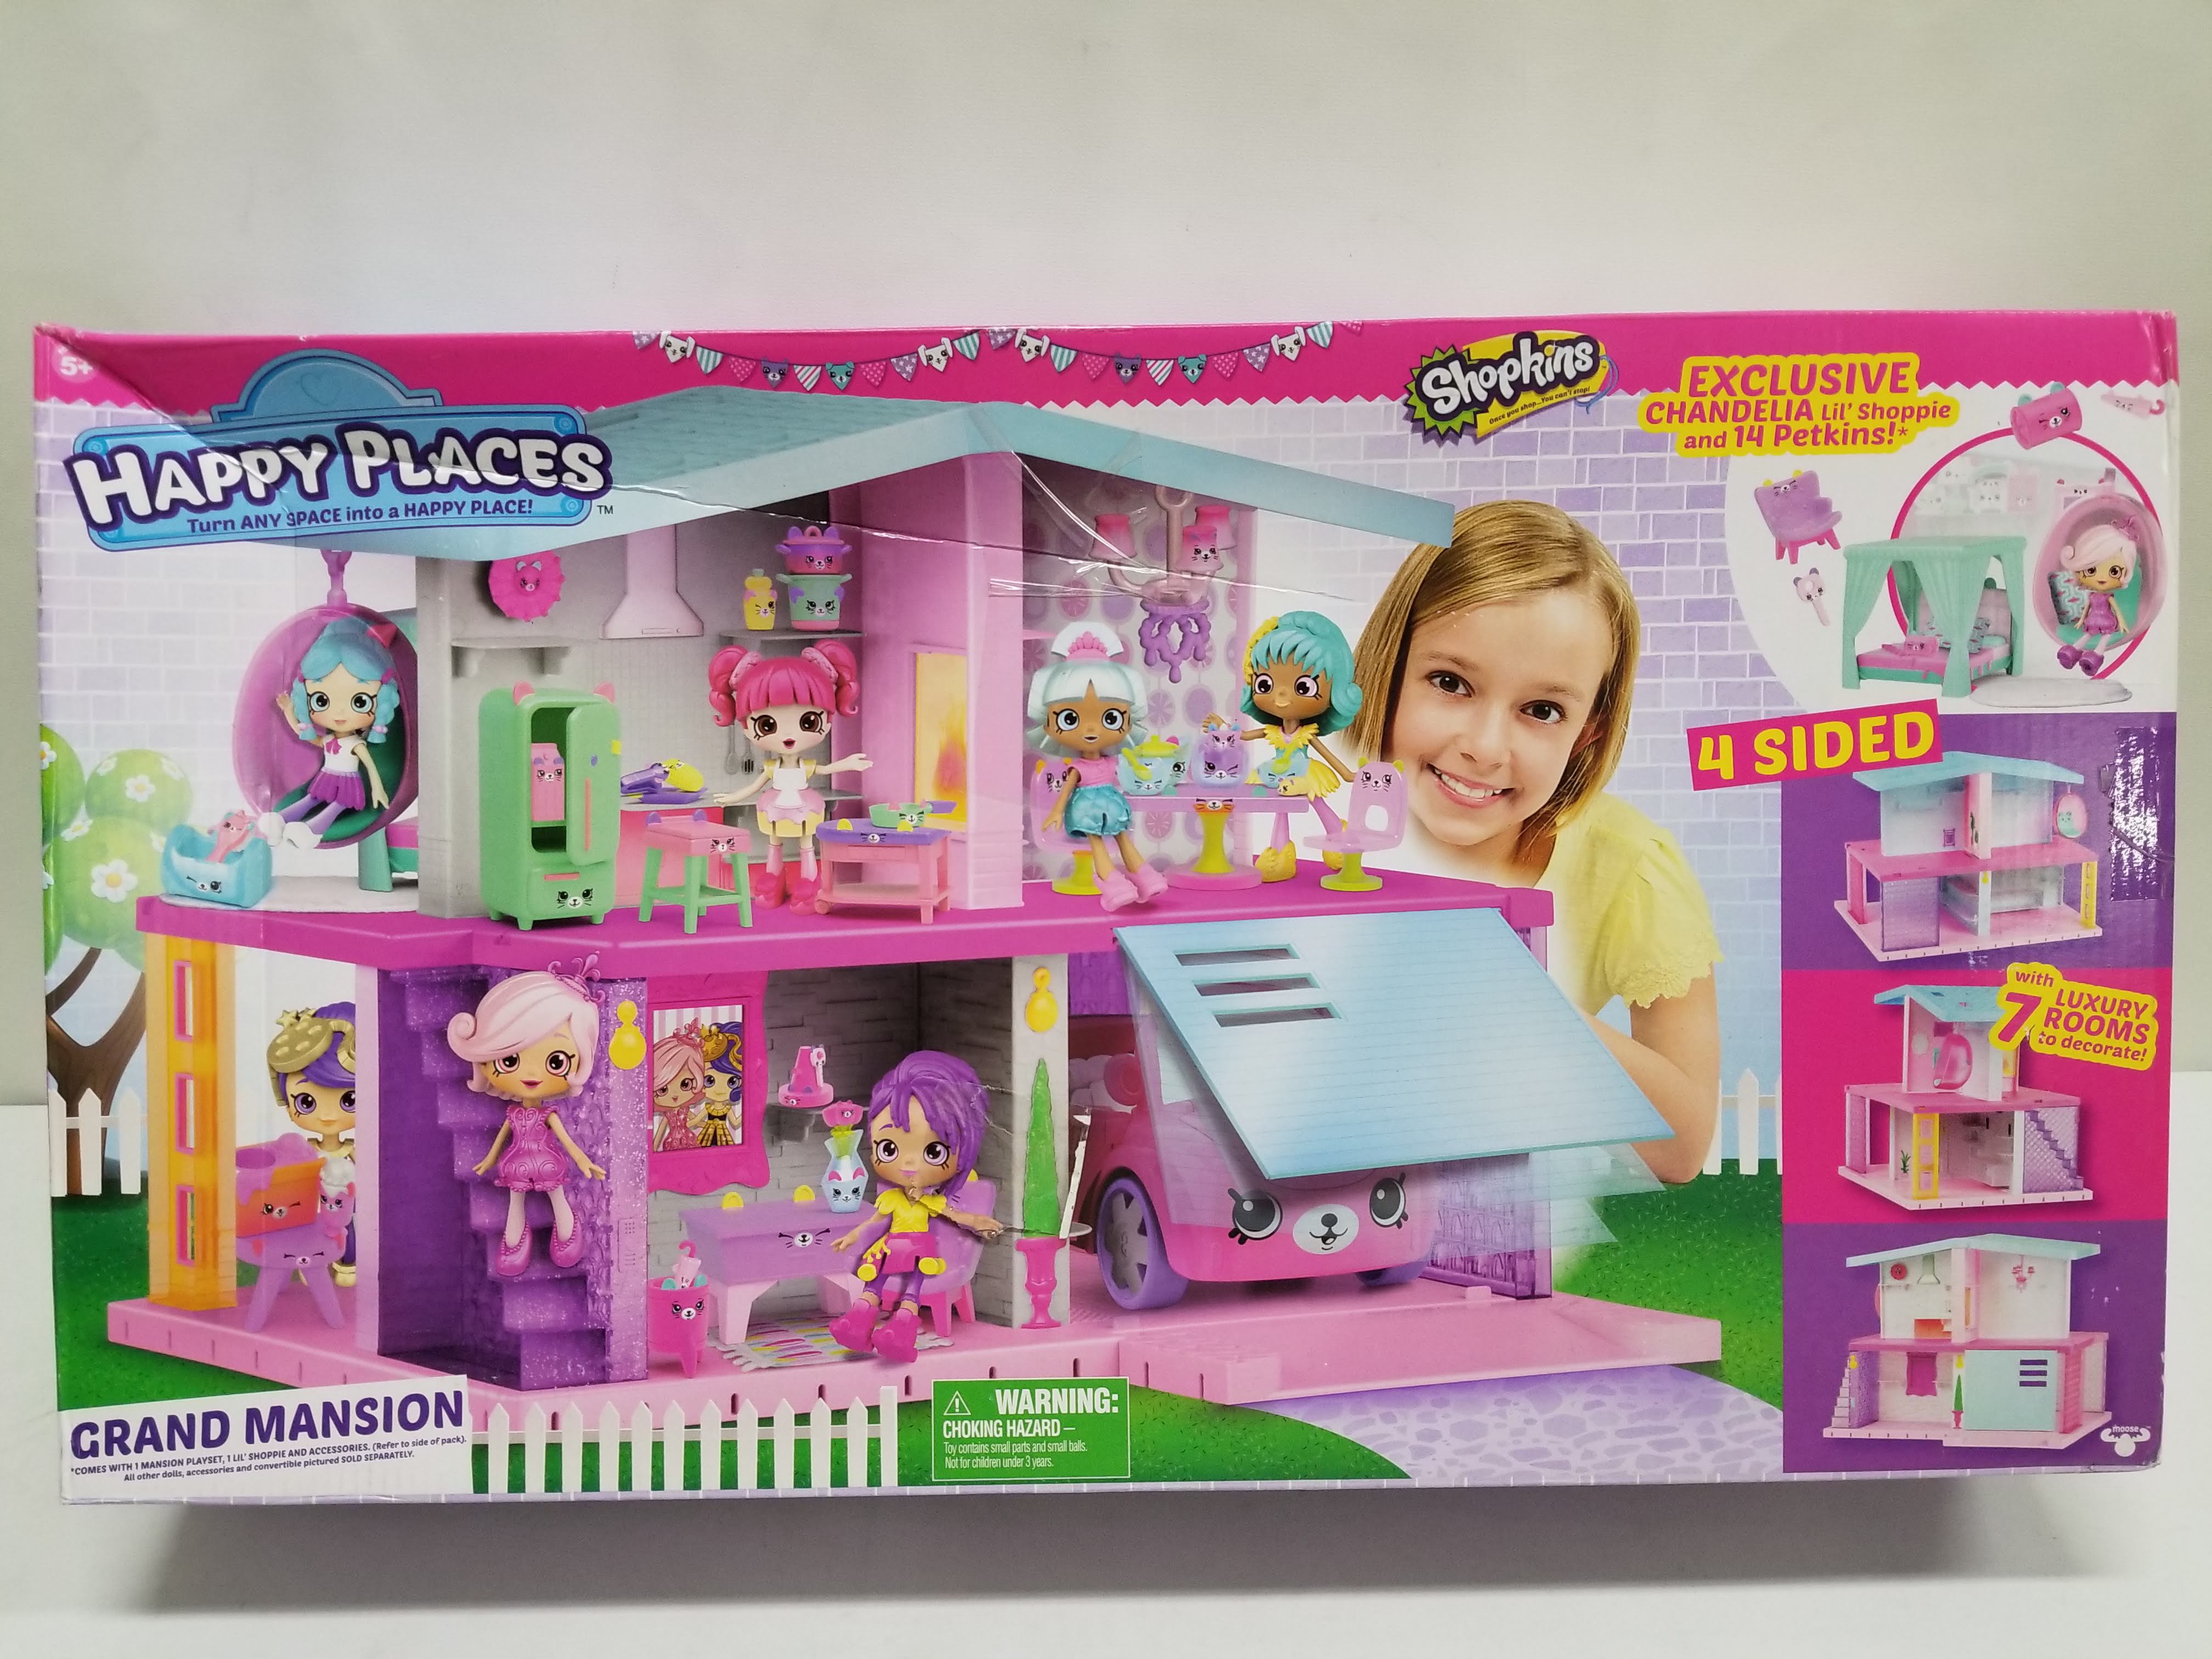 Happy Places Shopkins Mansion Playset